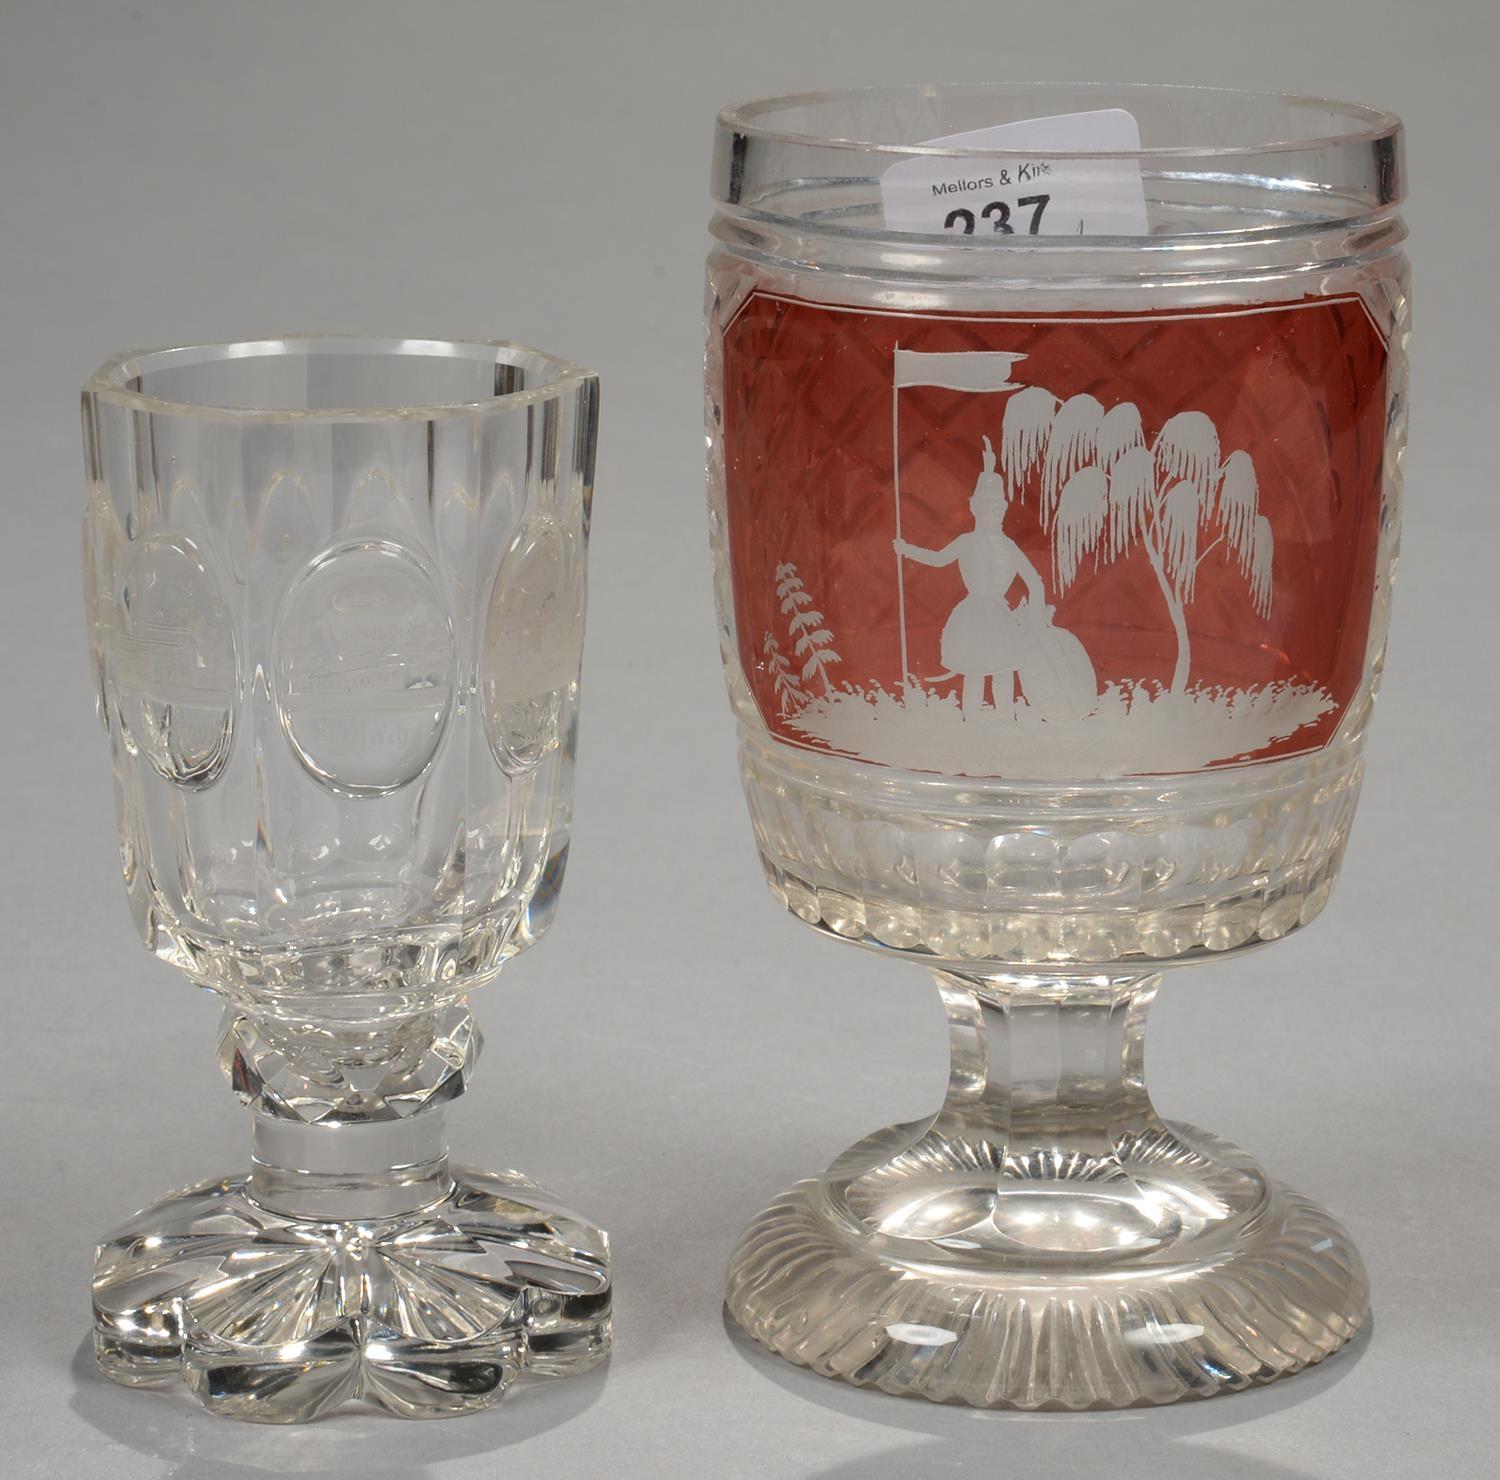 A BOHEMIAN RUBY FLASHED AND CUT GLASS GOBLET, 19TH C, THE PANEL TO THE FRONT ENGRAVED WITH A MAN